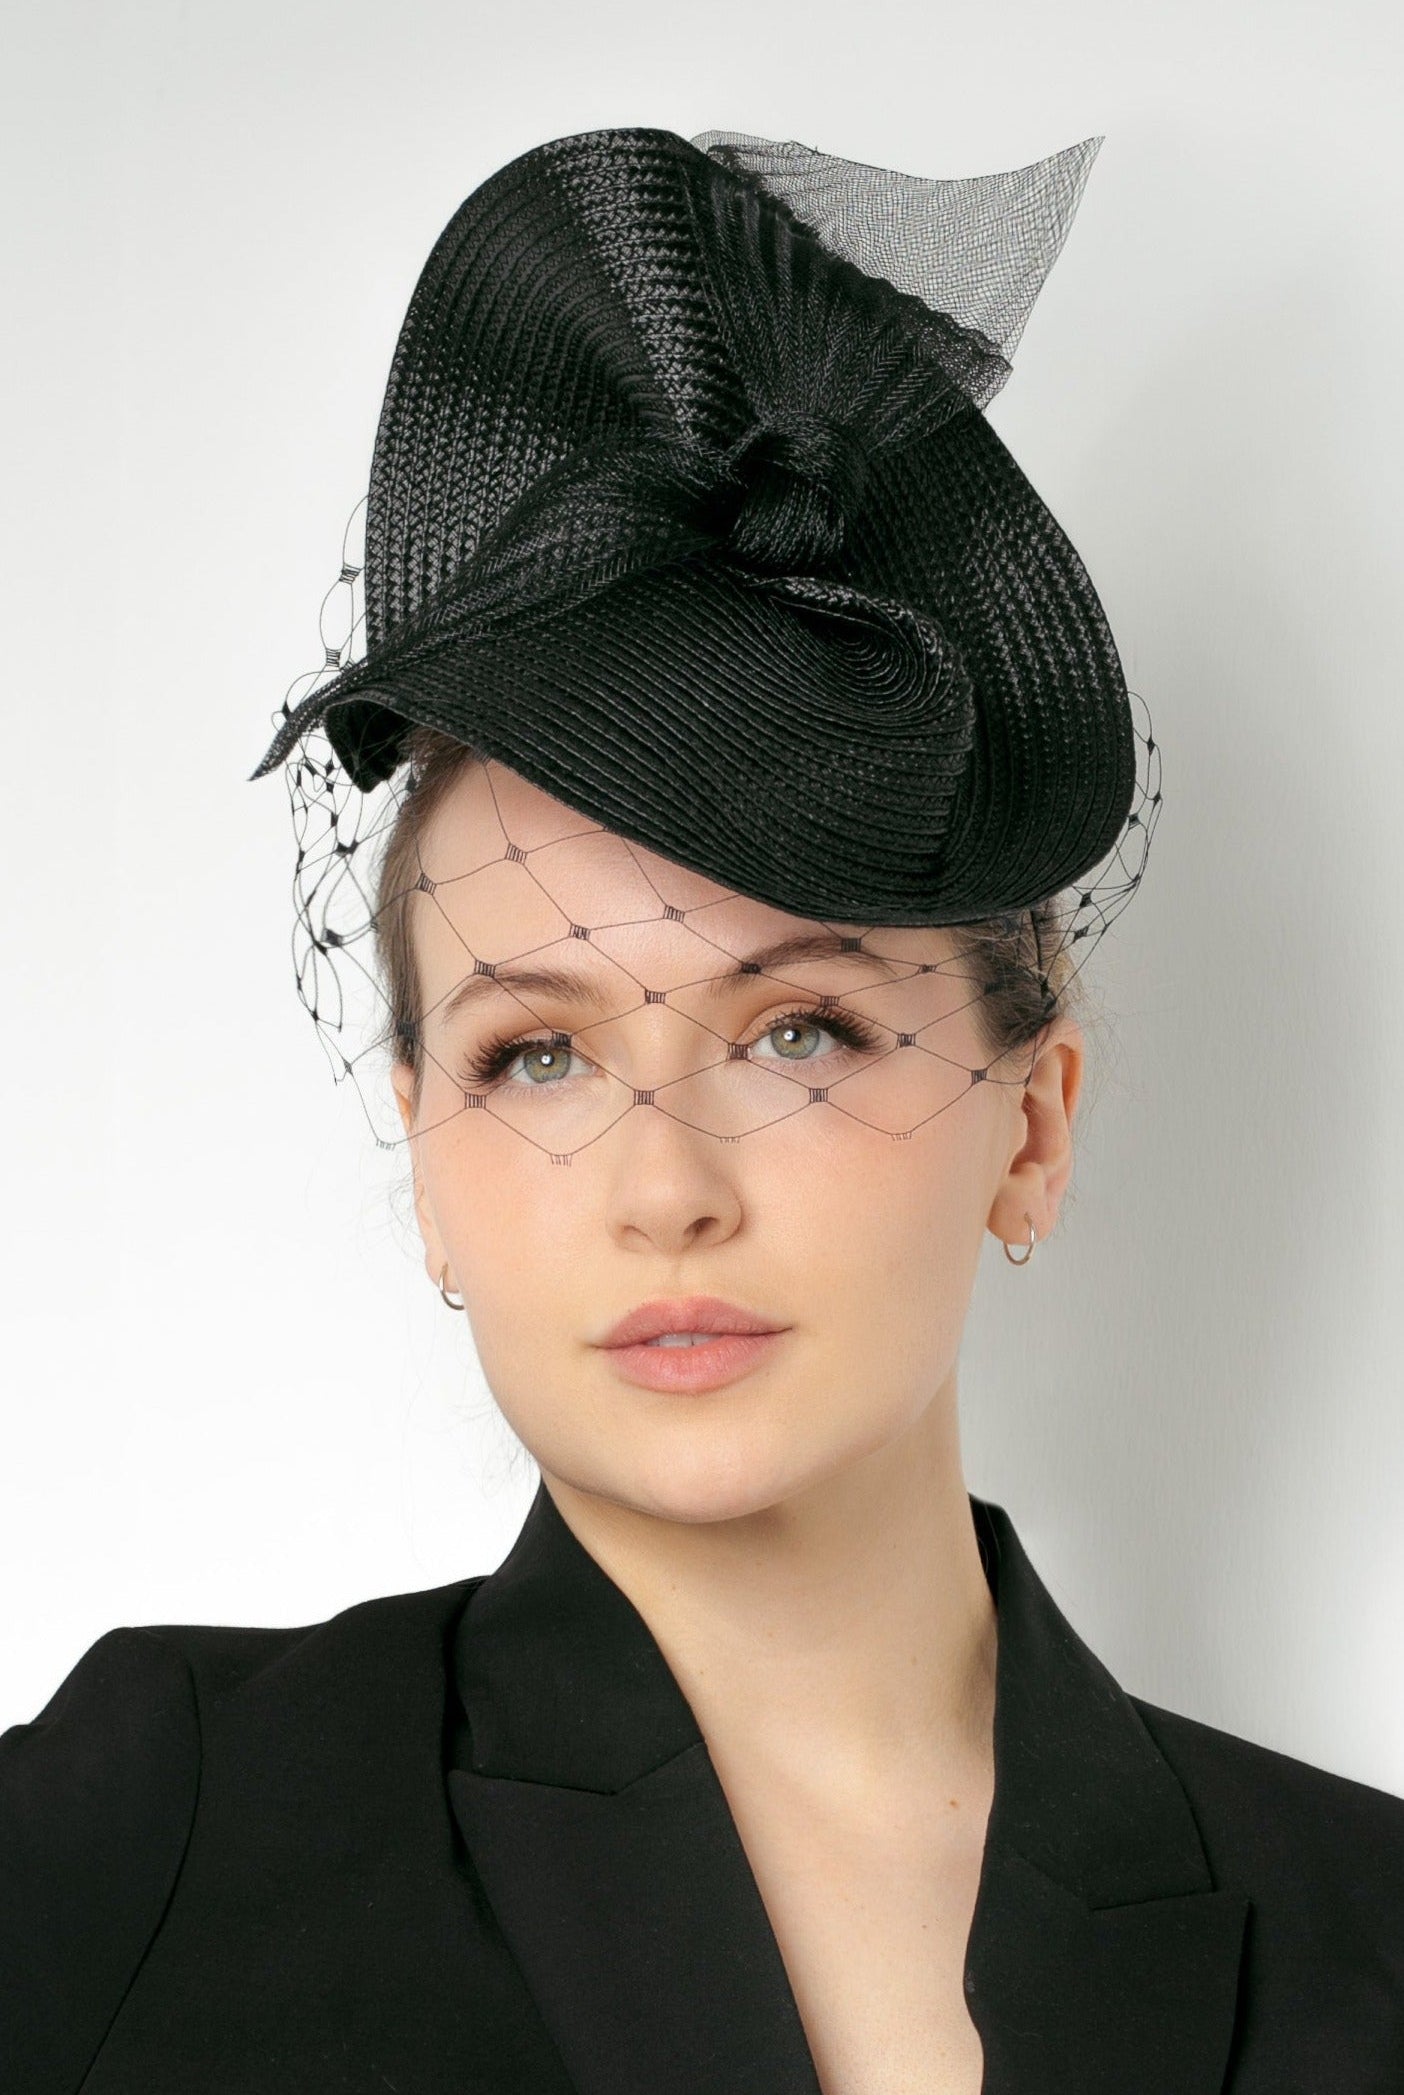 Sample Sale - SSS01 - Maggie Mowbray Millinery